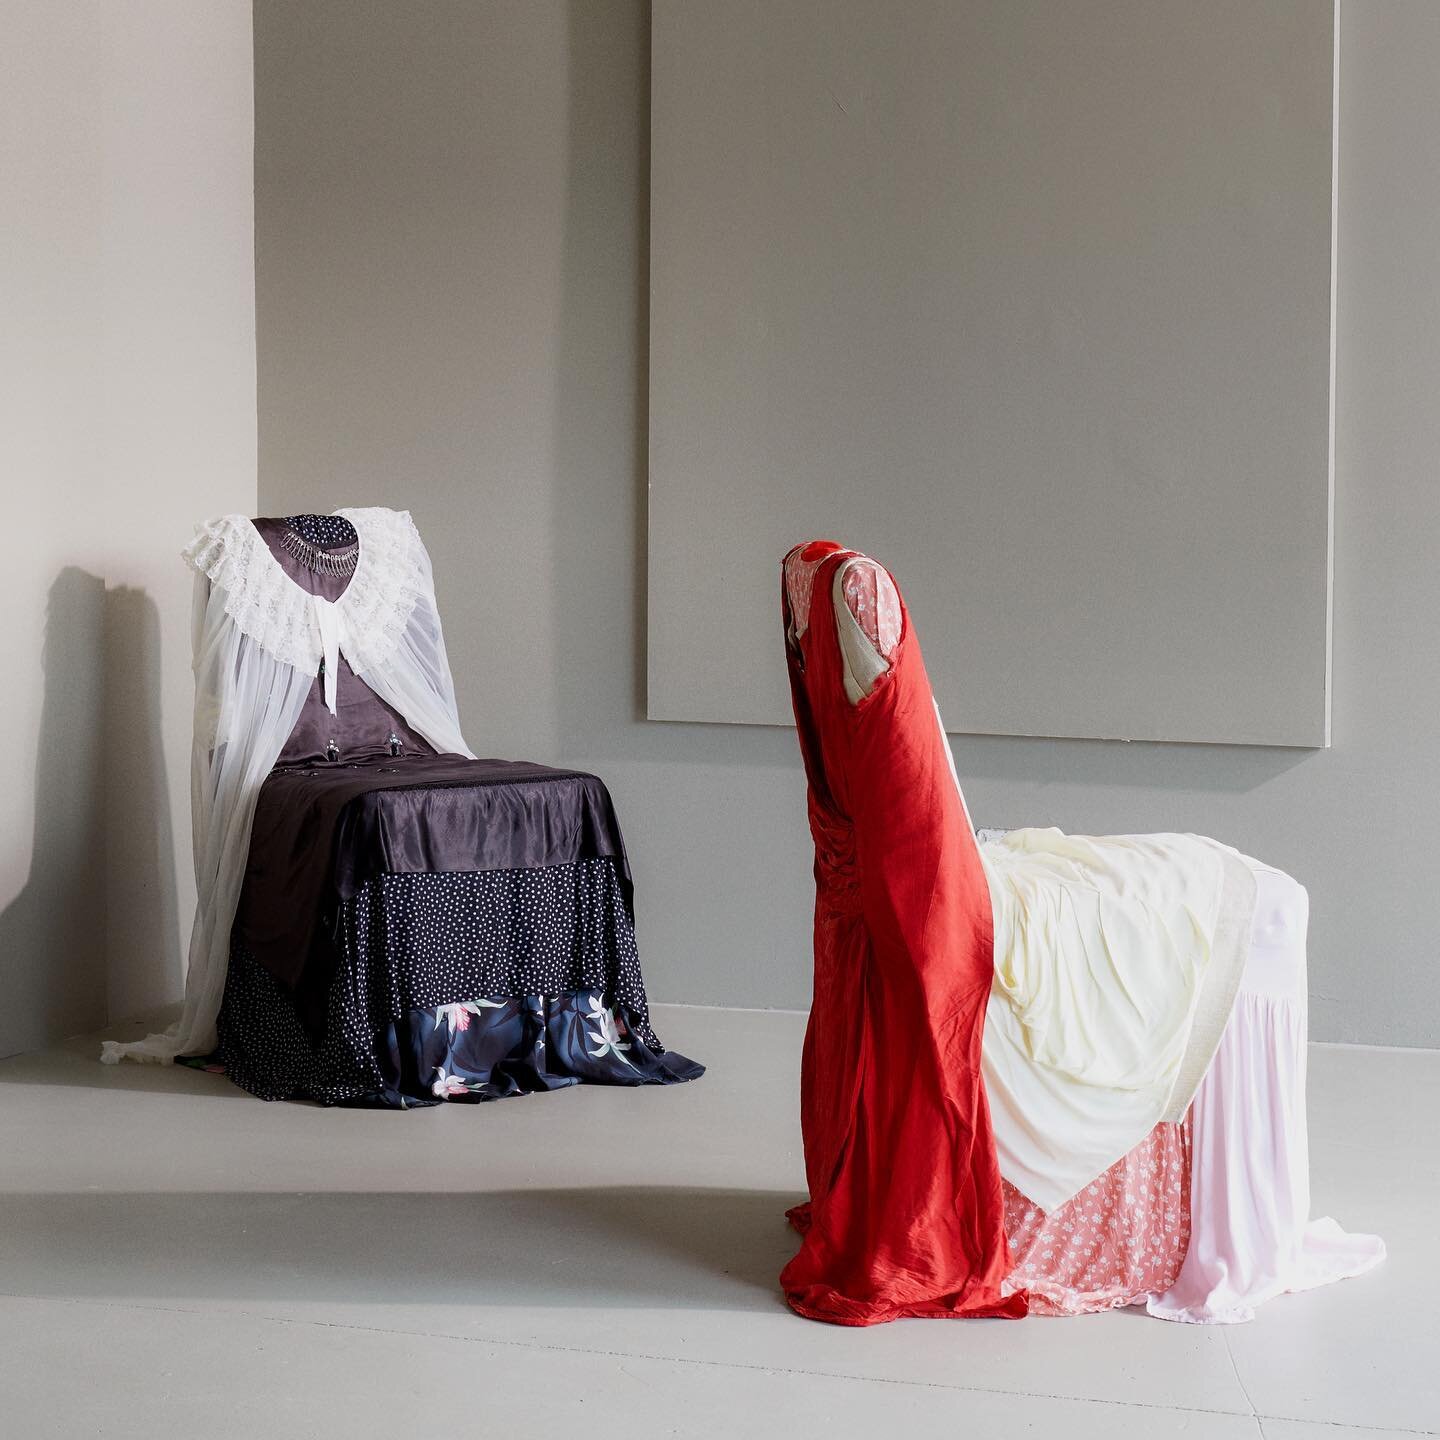 AFTER HOURS- presented by Volker Haug Studios 

H.B.Peace Removable chair covers, rag-out vintage dresses on hard rubbish freedom dining chairs. 

Photographer: @piercarthew 

Part of Melbourne Design Week 2022

Featuring work by: Edition Office with